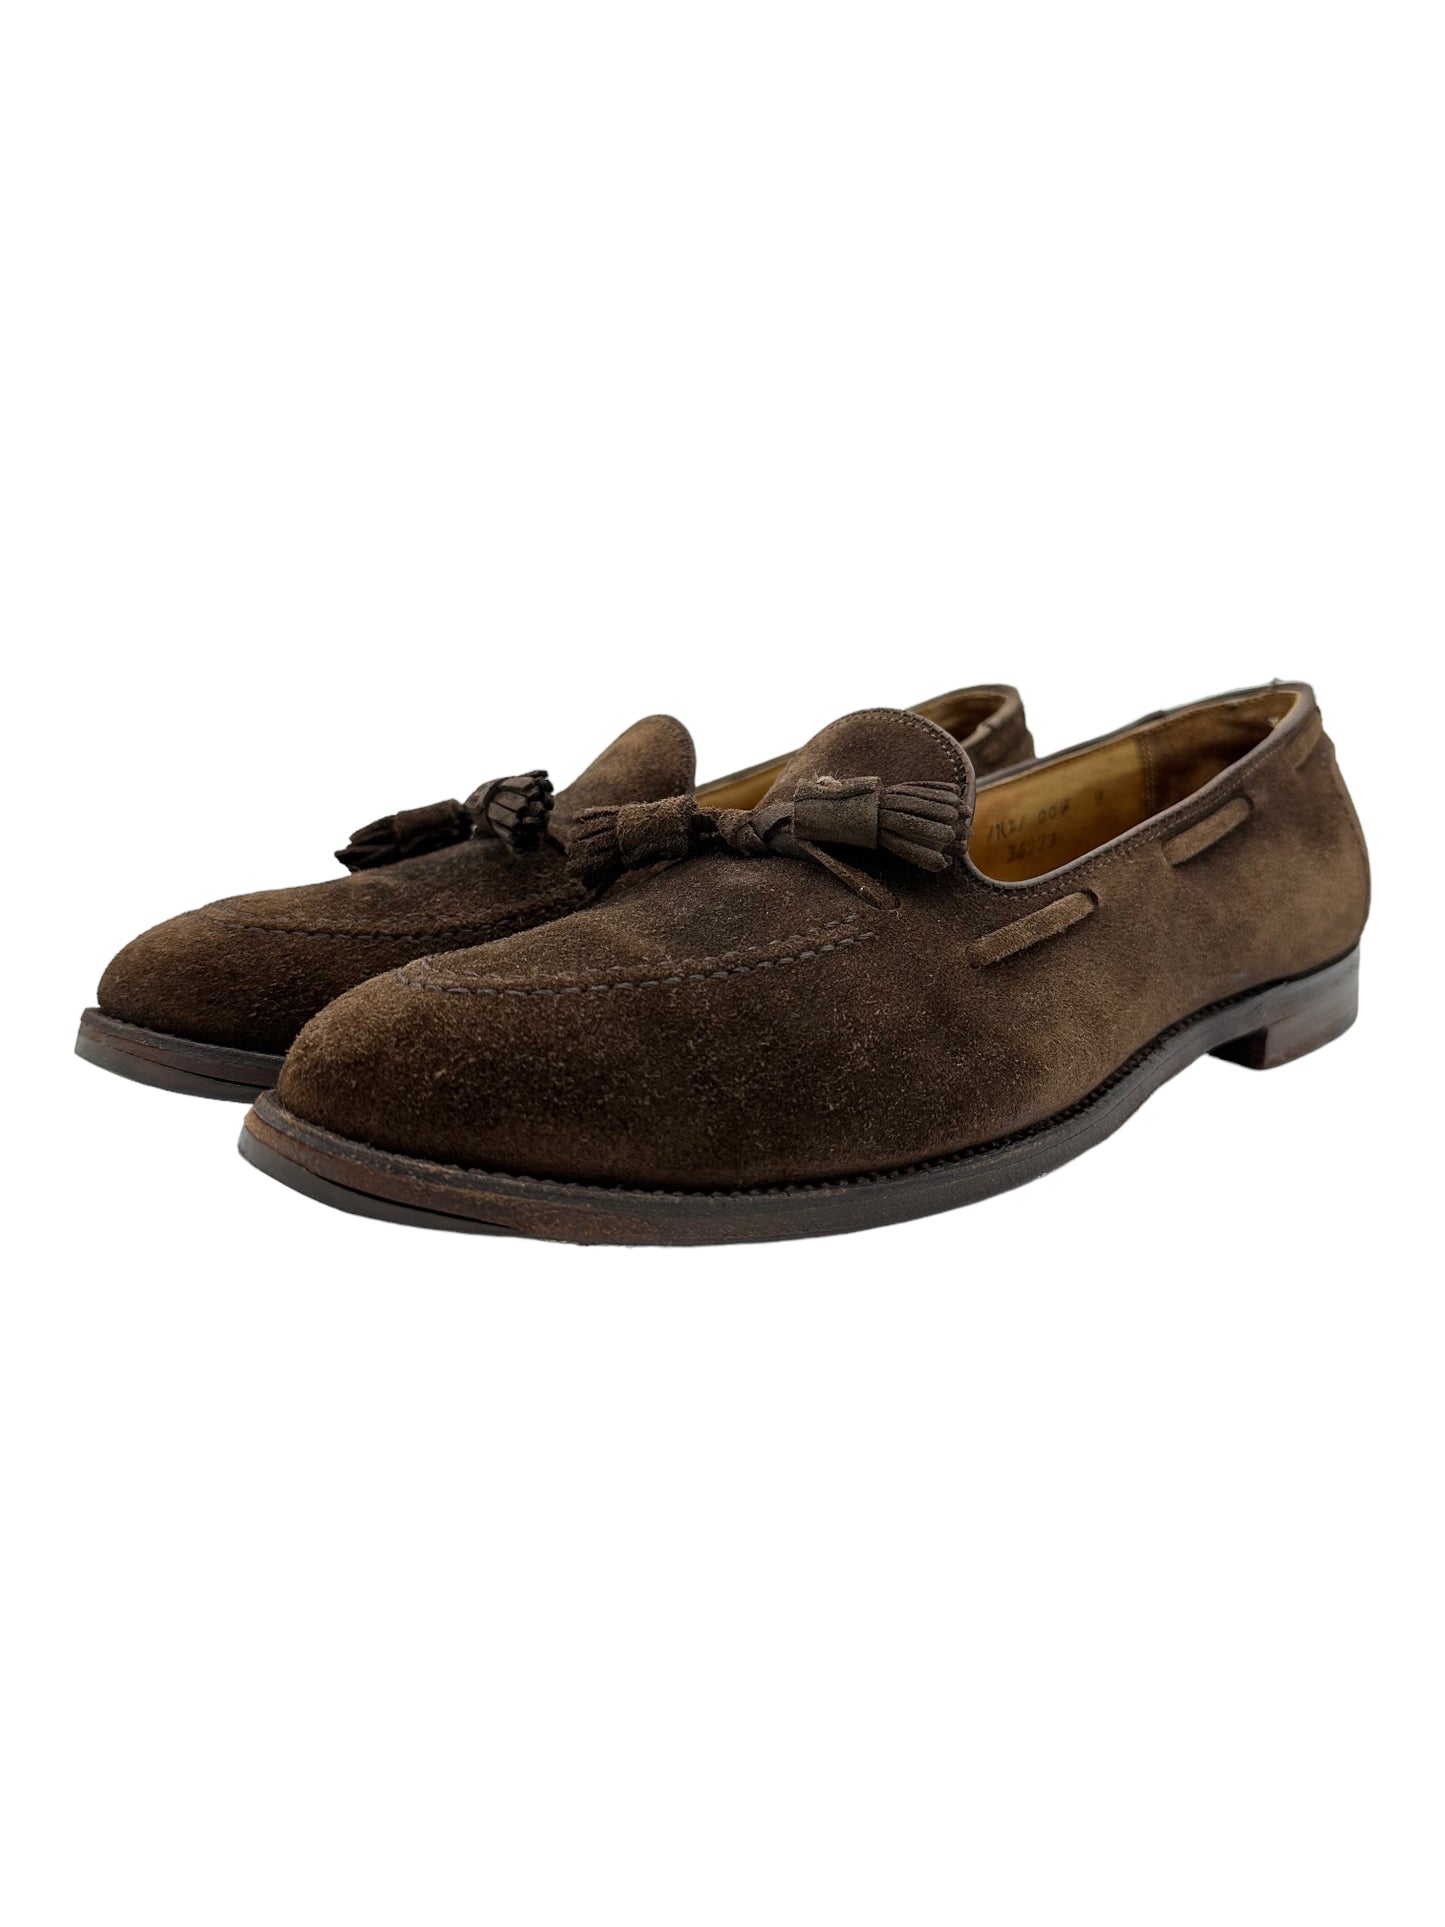 Alden 3697F Brown Snuff Suede Tassel Loafers - Genuine Design Luxury Consignment for Men. New & Pre-Owned Clothing, Shoes, & Accessories. Calgary, Canada